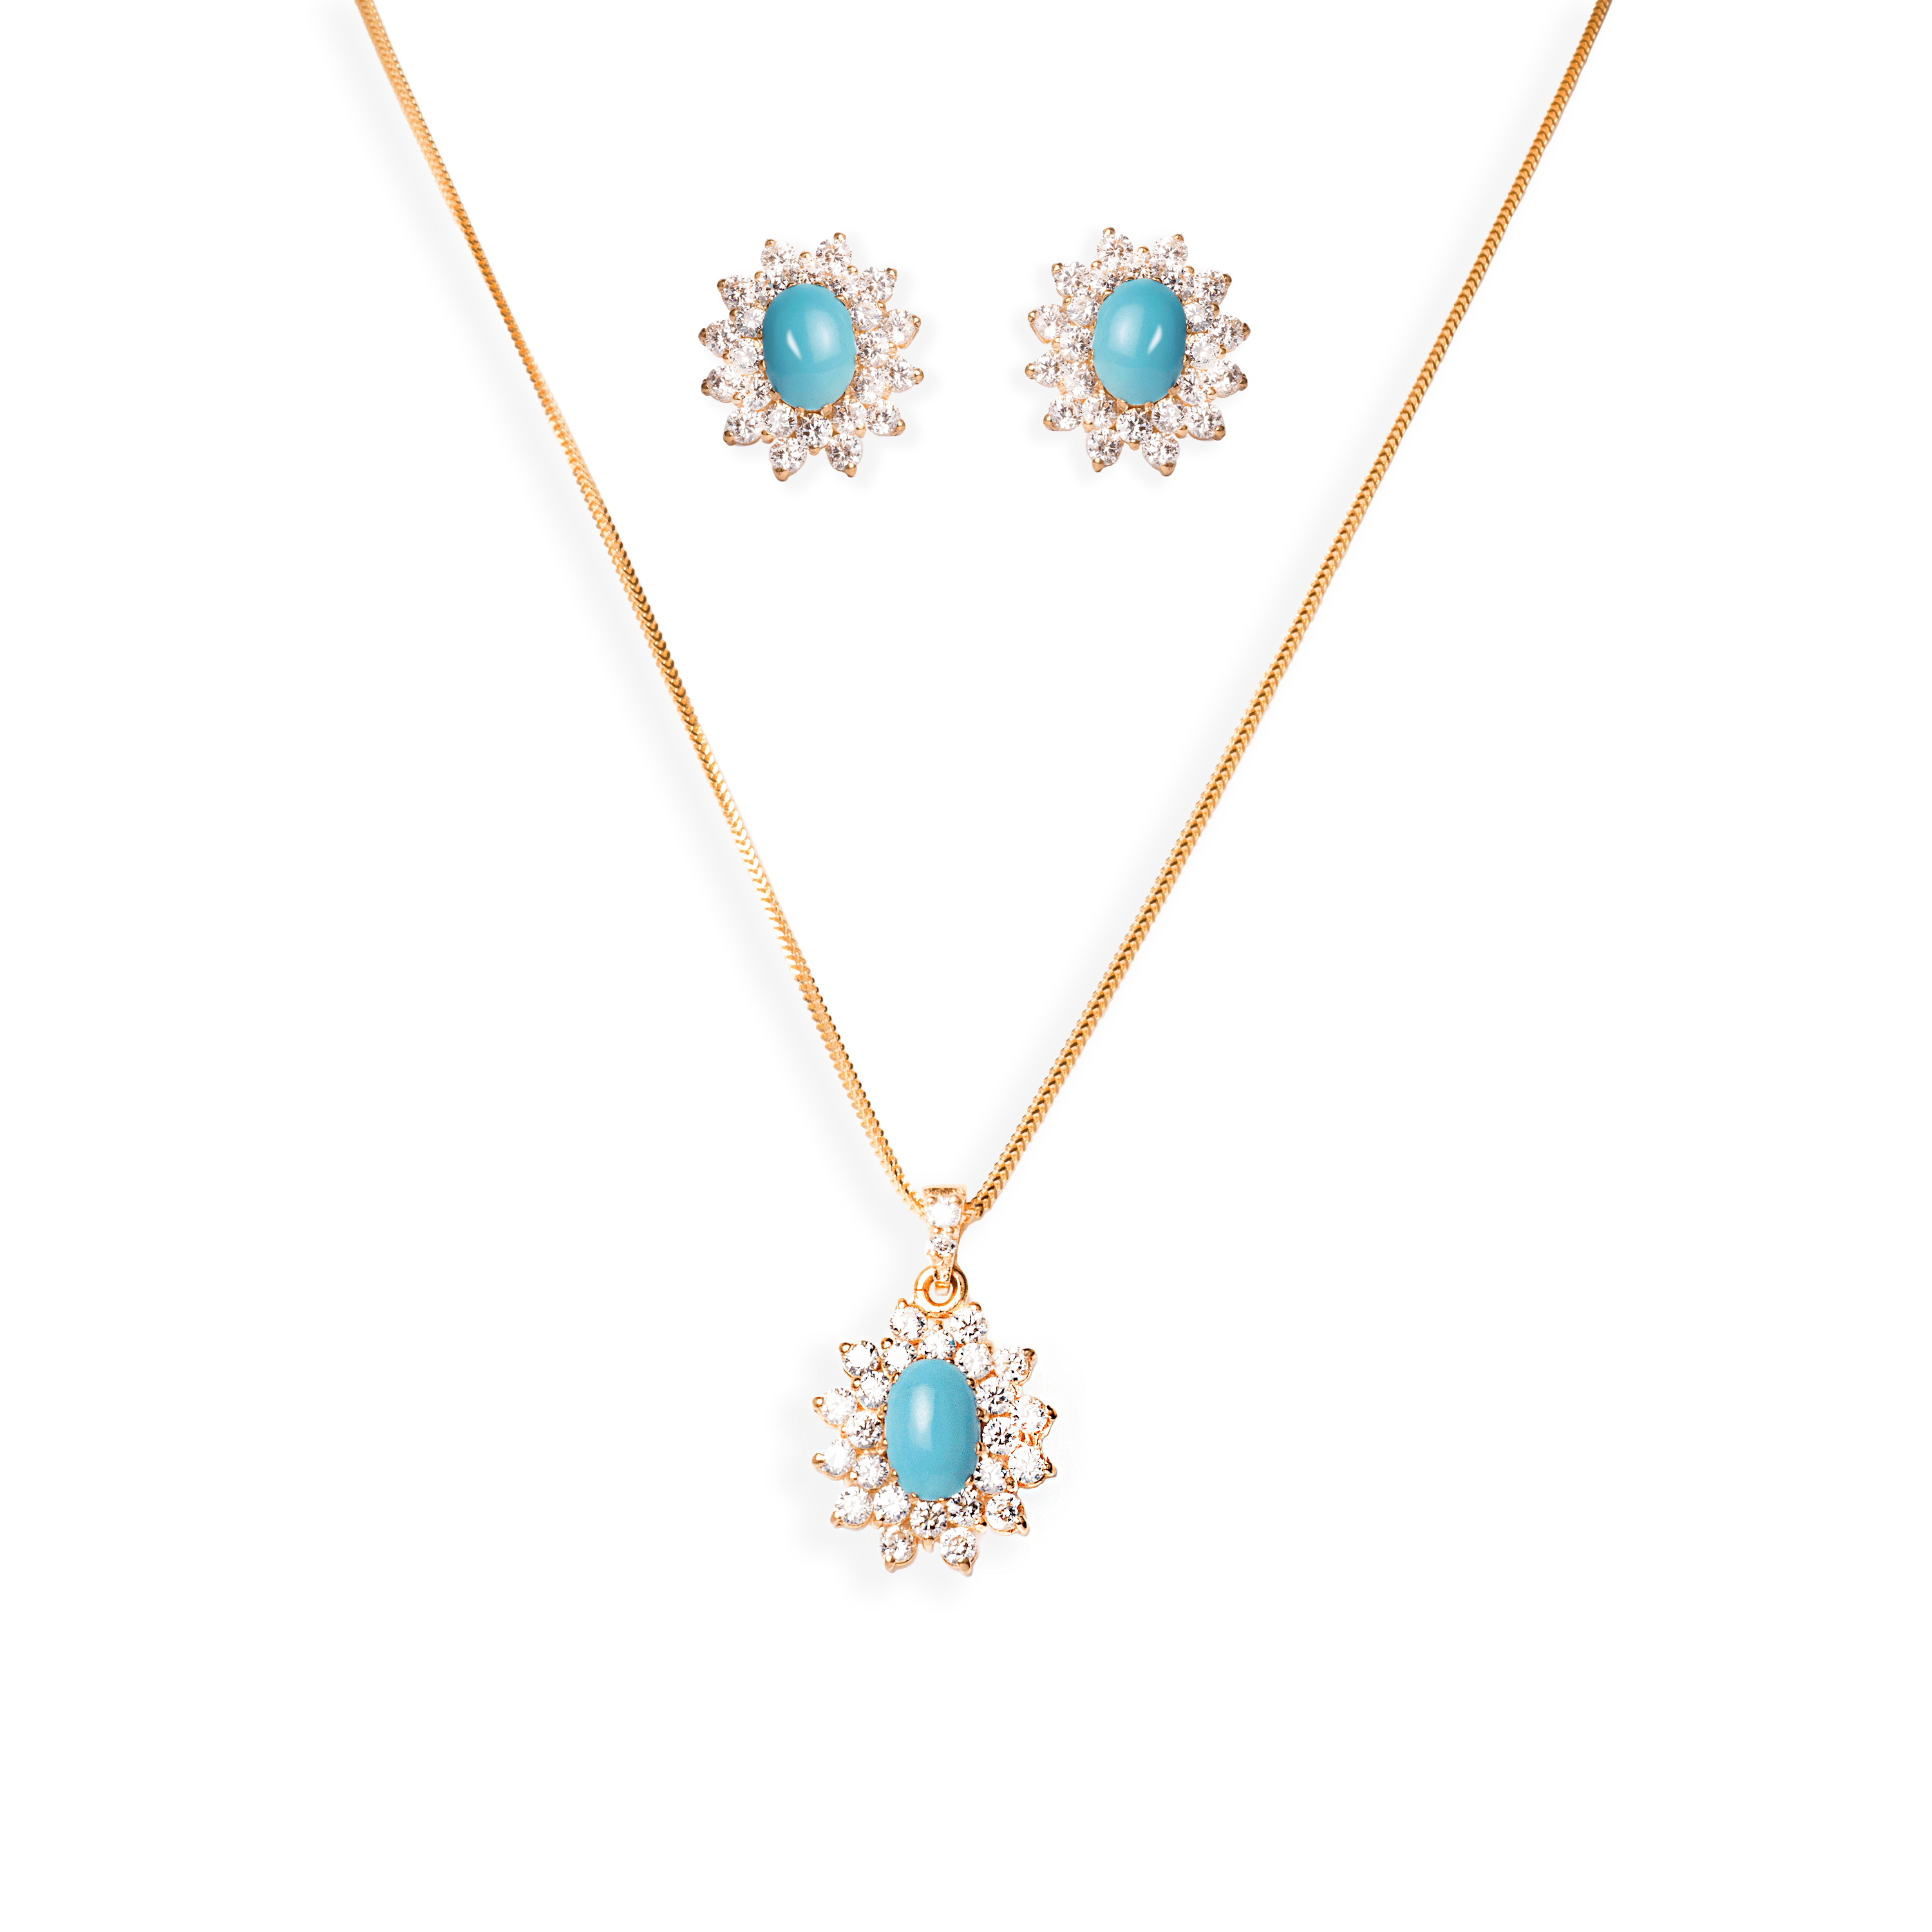 22ct Gold Cubic Zirconia and Turquoise Chain, Pendant and Earrings Set (10.2g) C-3795 P-7300 E-7300 - Minar Jewellers